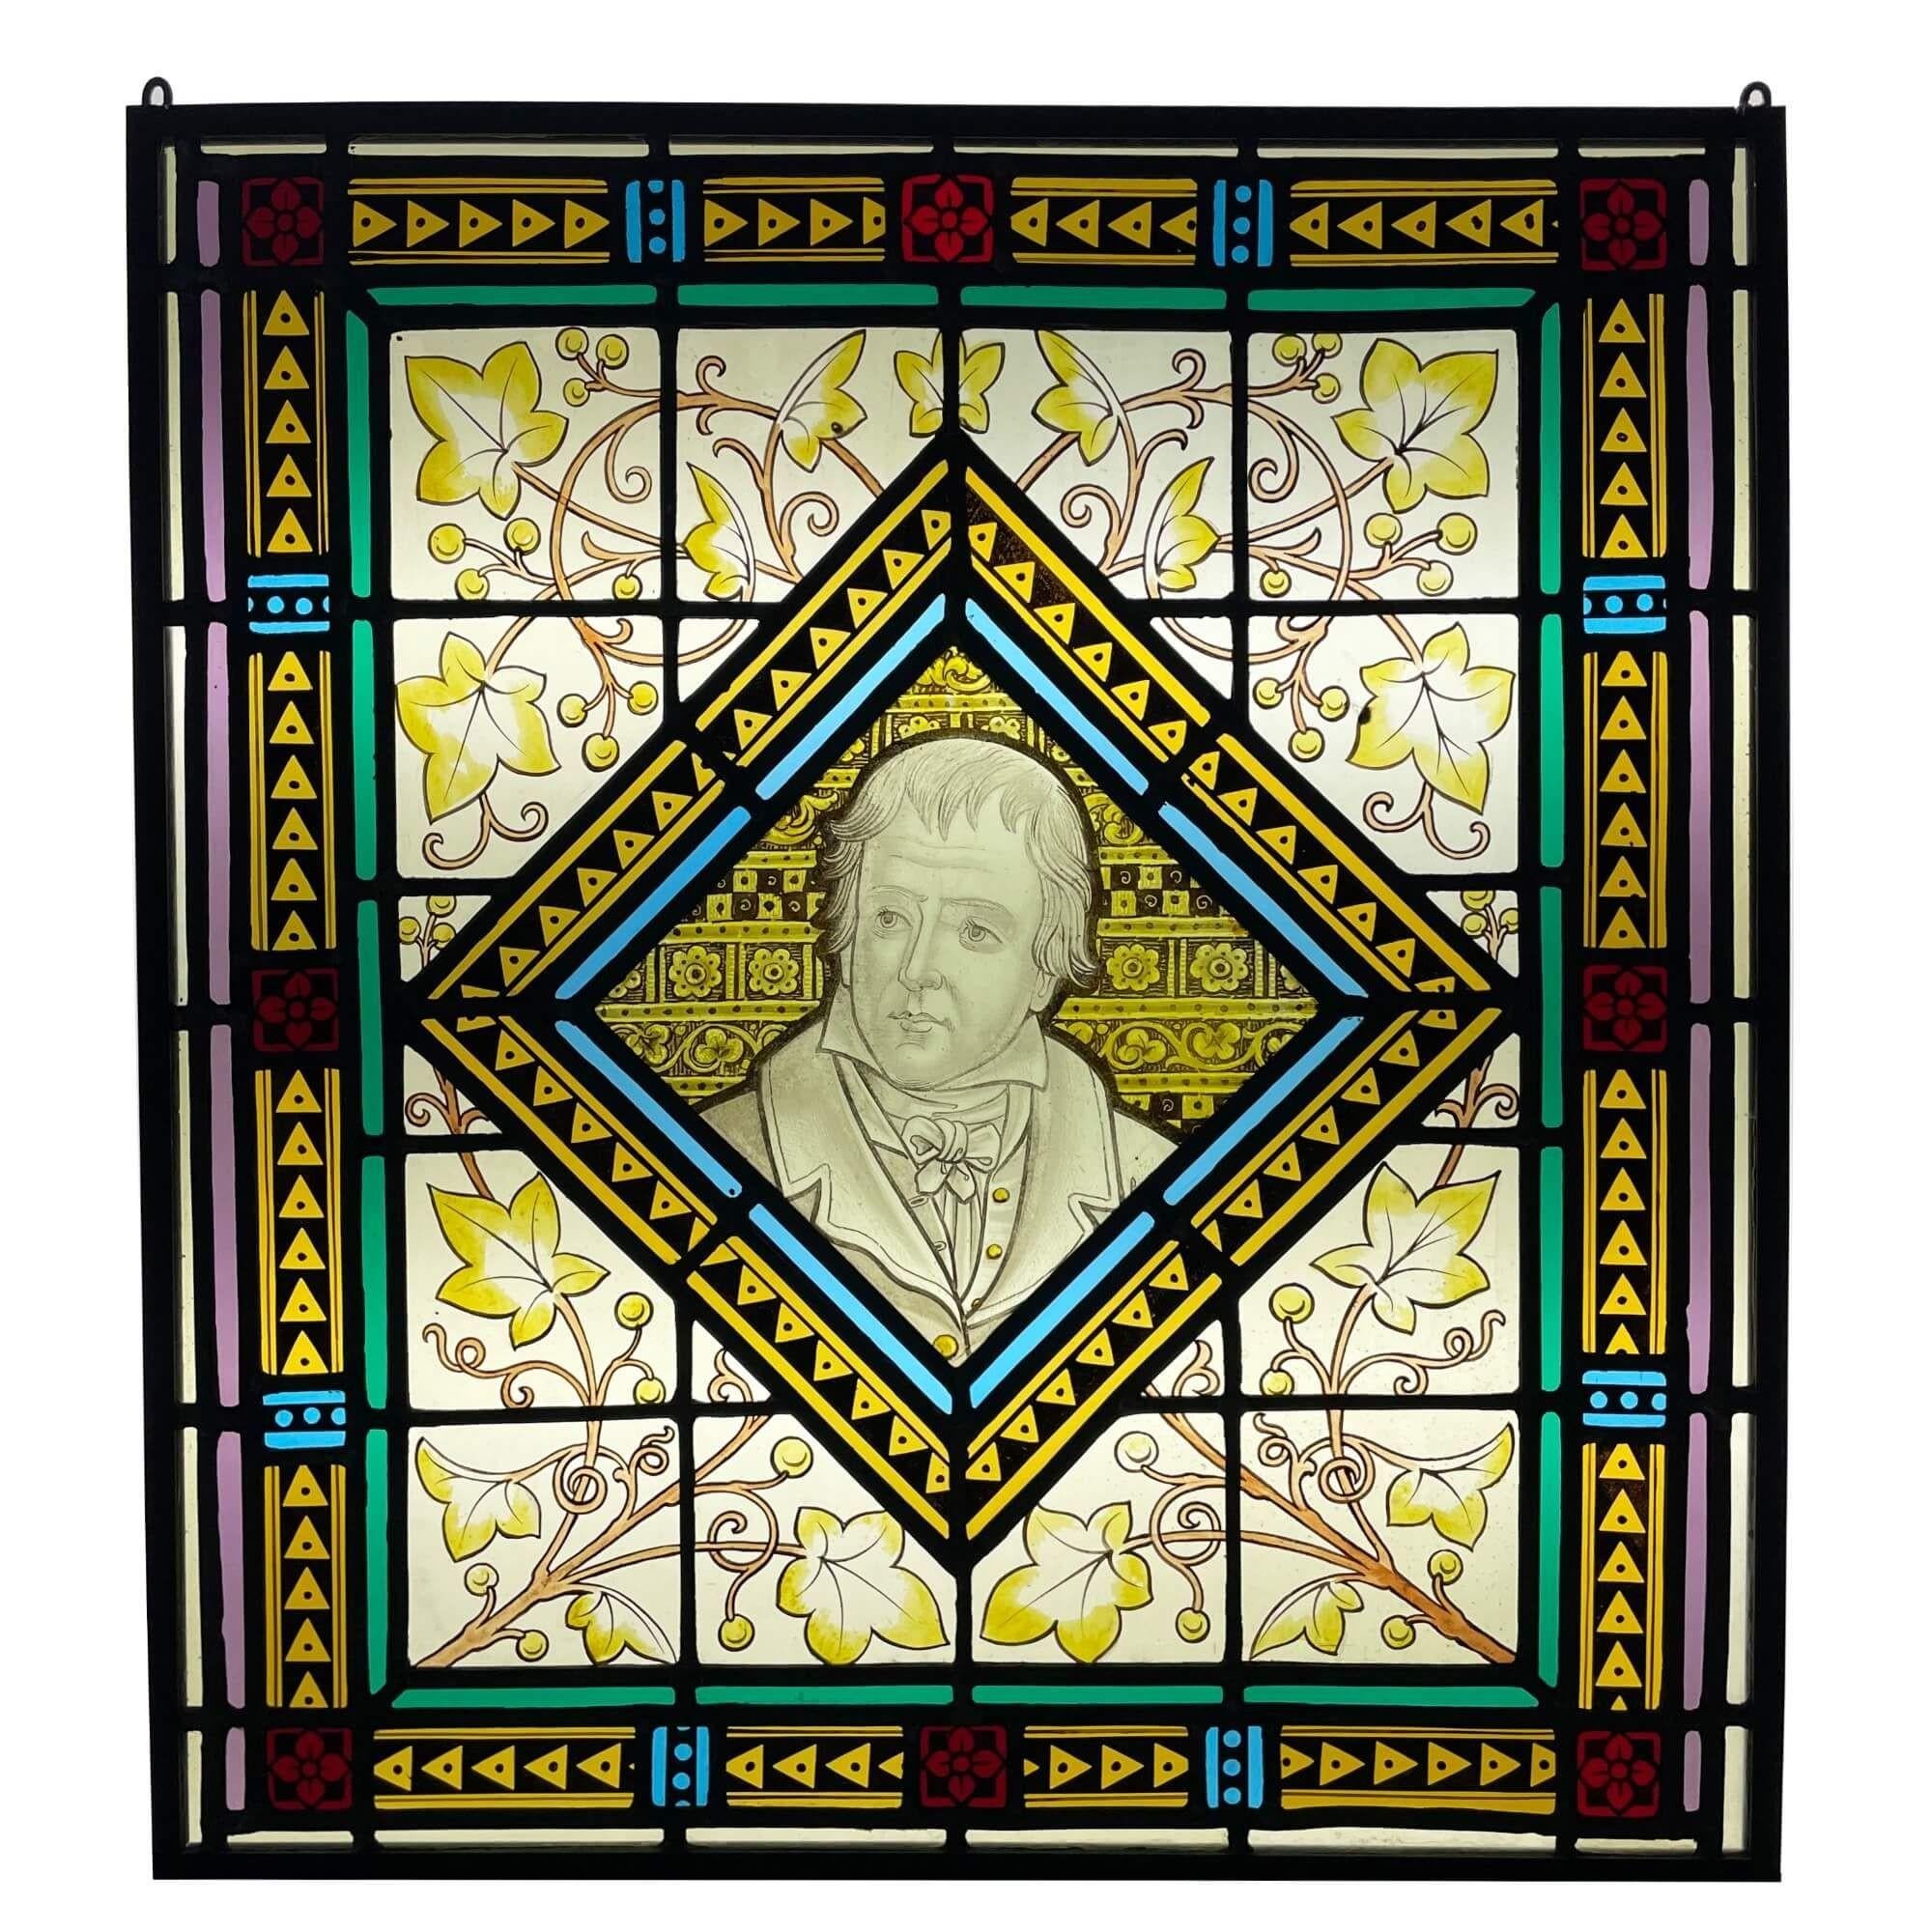 Walter Scott Antique Stained Glass Window In Fair Condition For Sale In Wormelow, Herefordshire